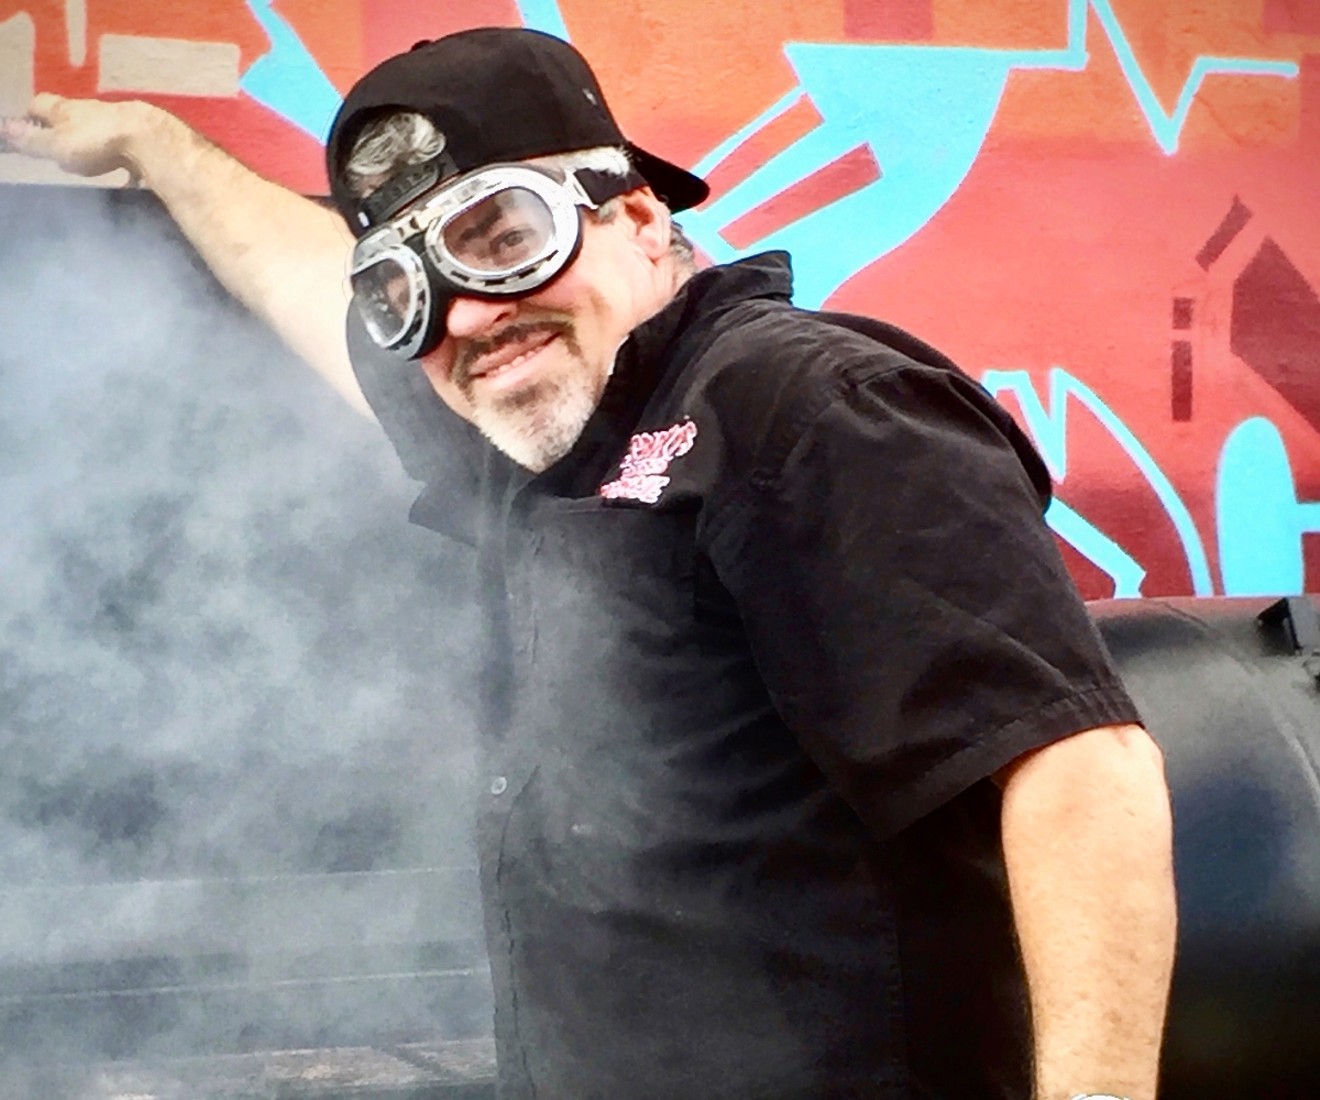 Gone too soon: Kevin Kehoe, pit master extraordinaire and cofounder of Sparky's Roadside Barbecue in downtown Miami.